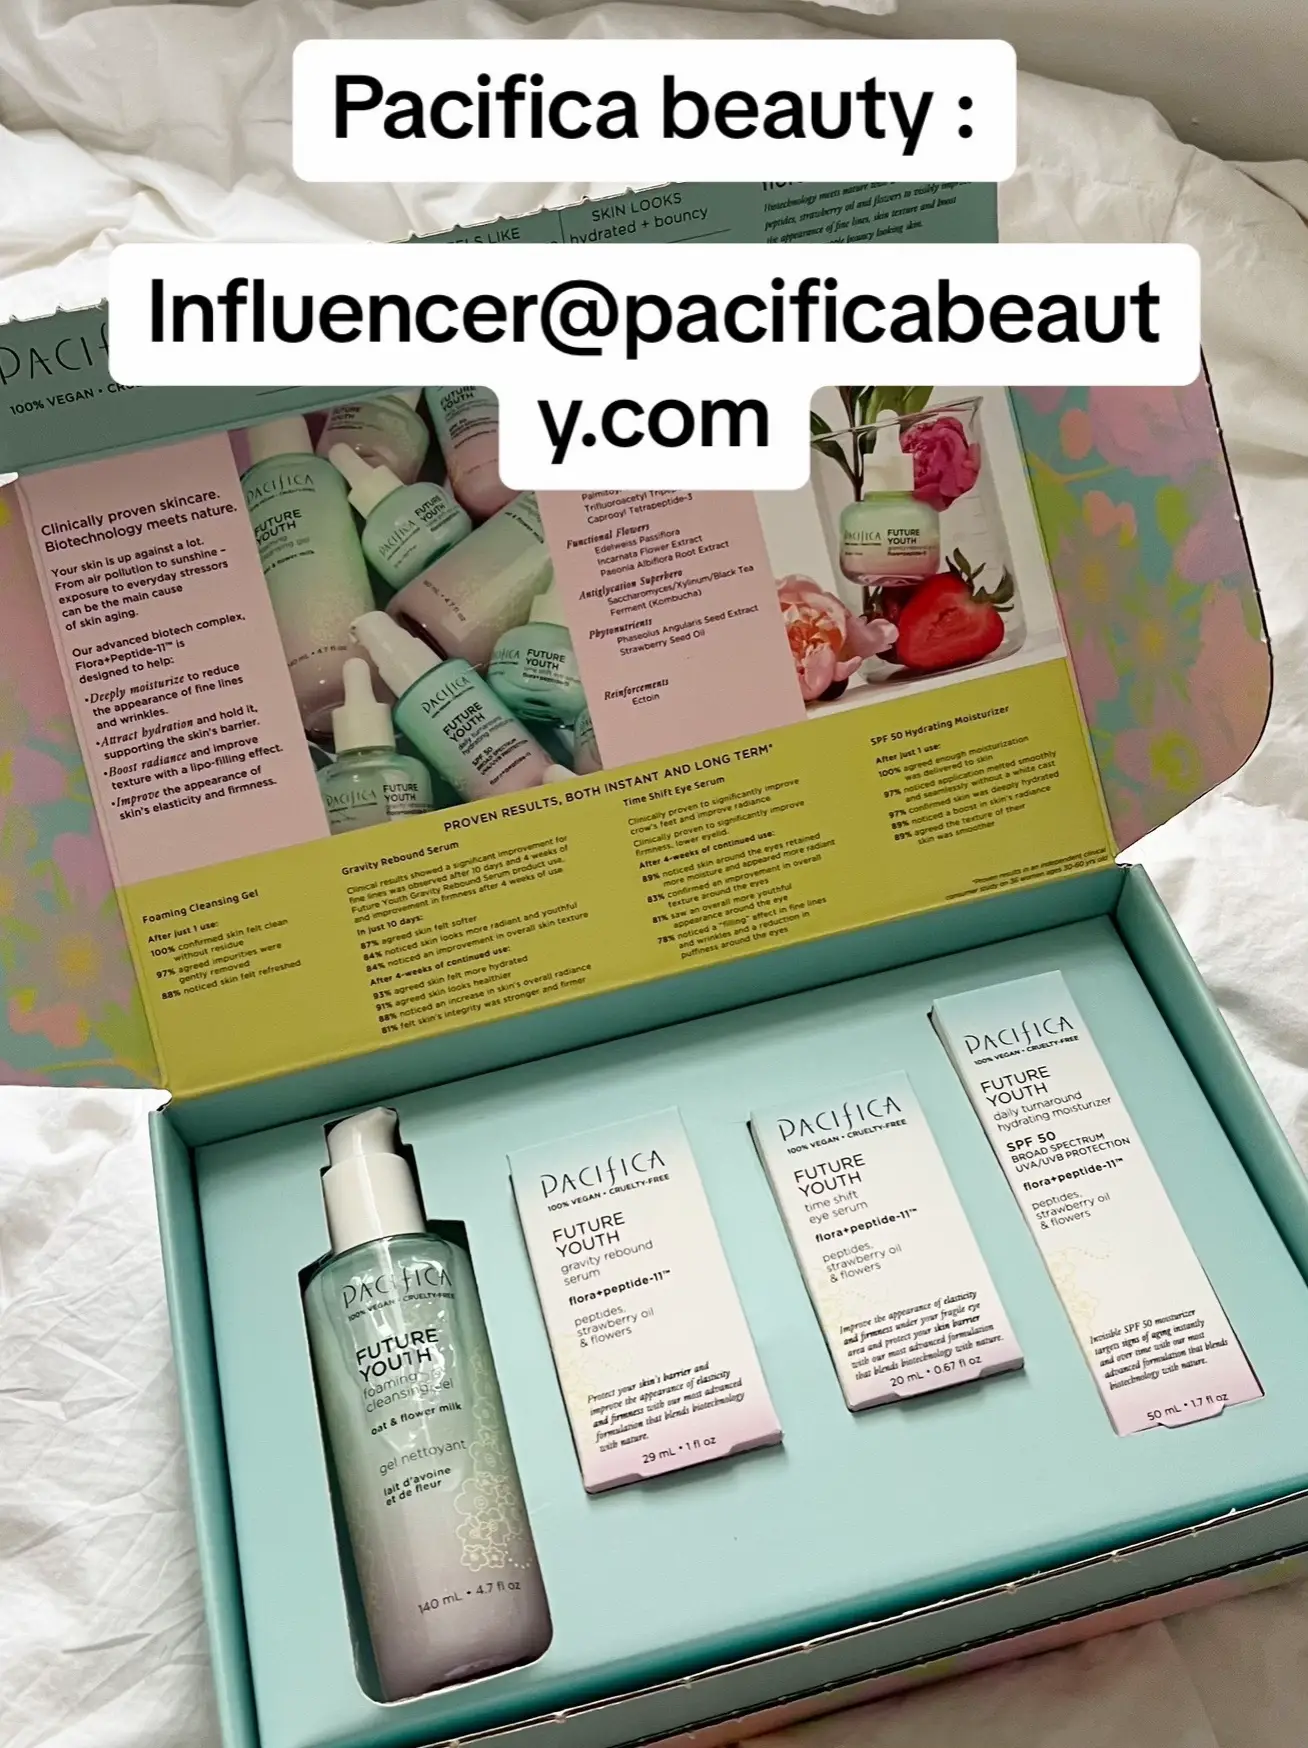  A box of Pacifica beauty products.